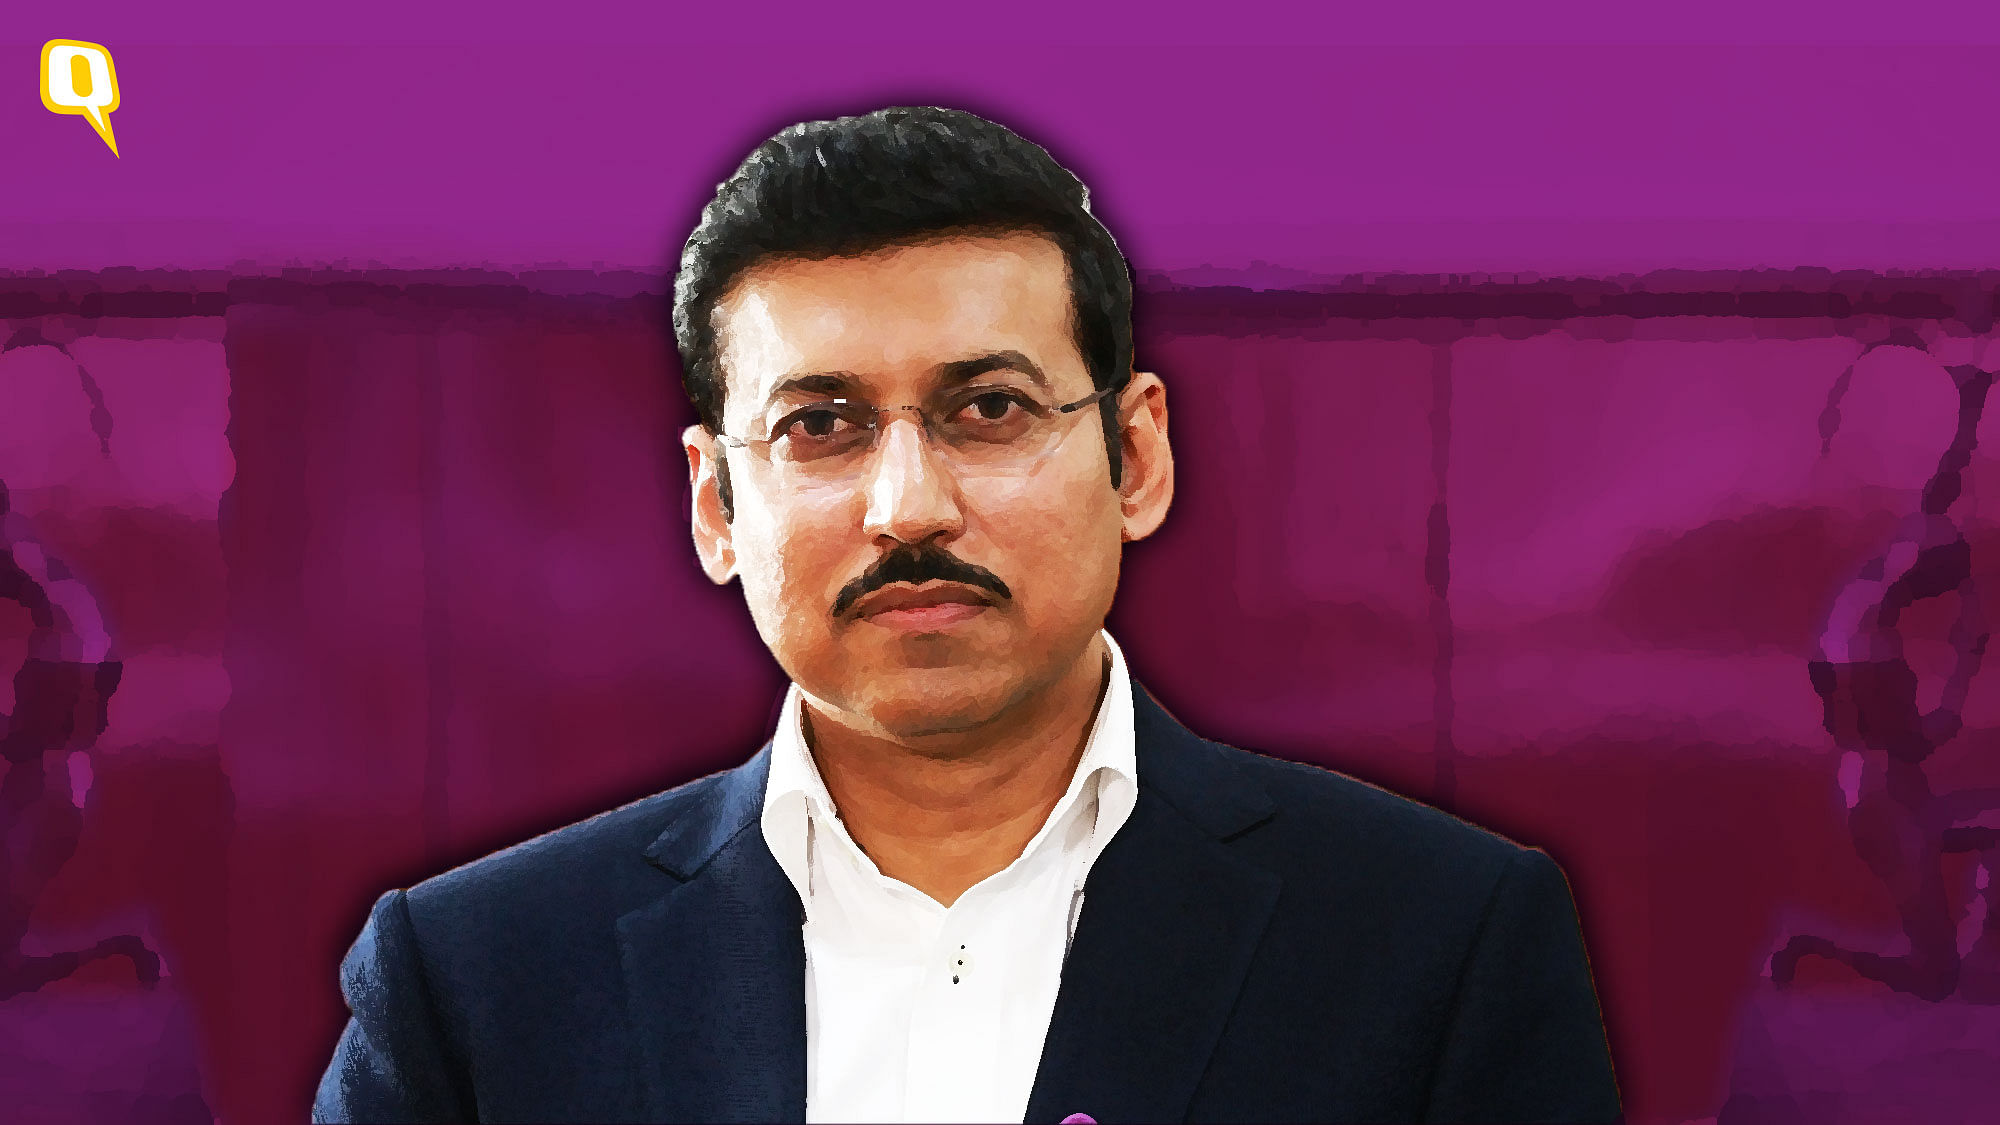 2004 Olympic Silver medallist and Sports Minister Colonel Rajyavardhan Singh Rathore turns 49 on Tuesday, 29 January.